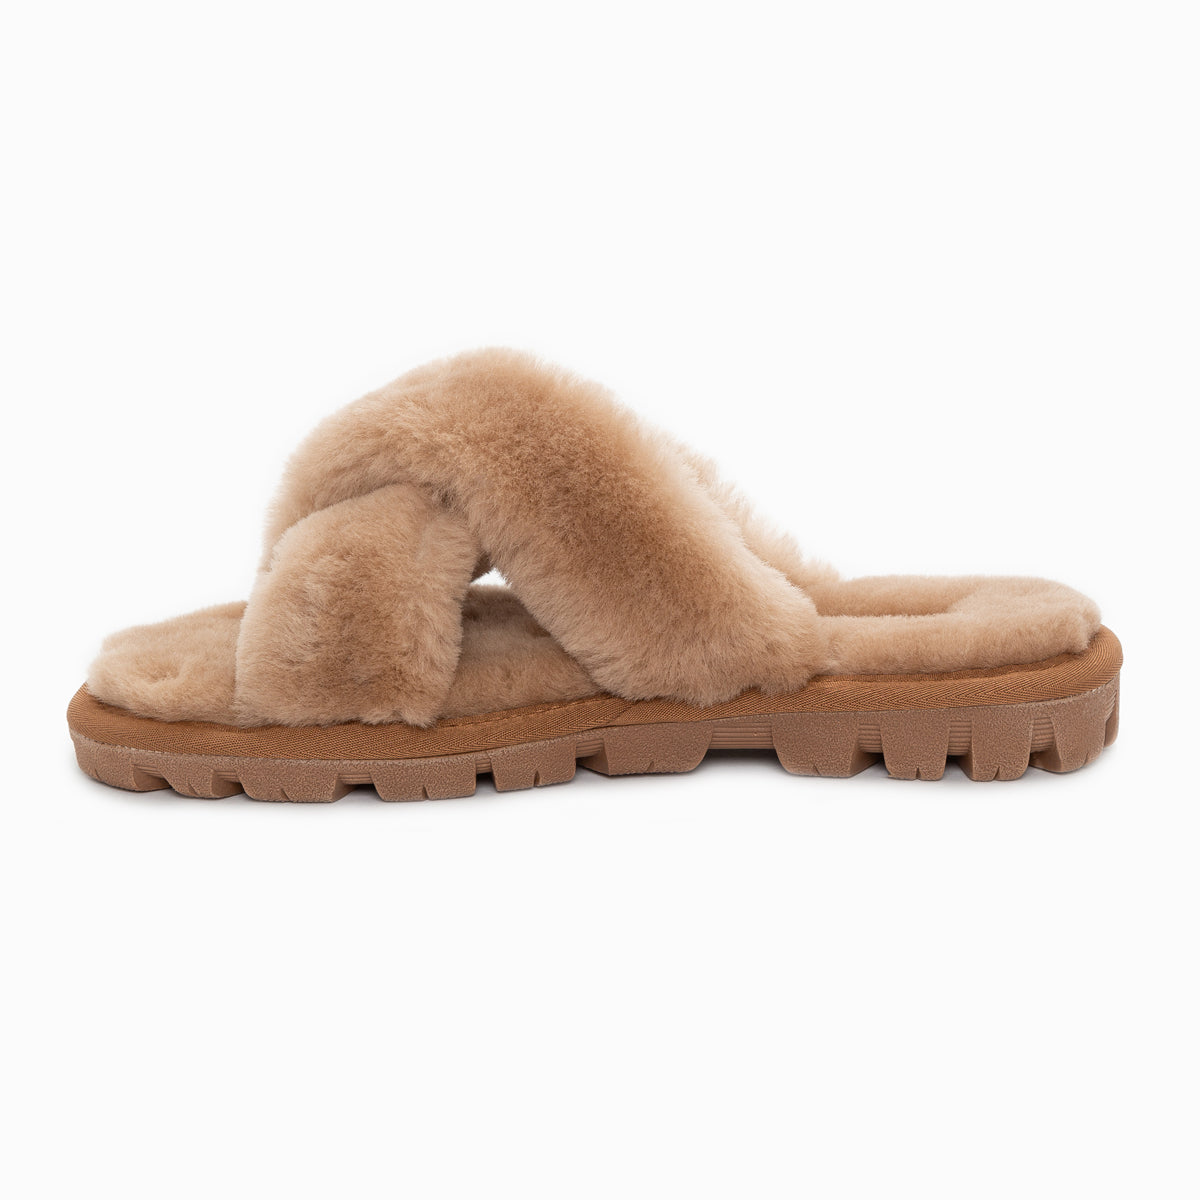 Ugg Premium Cross Over Slippers-Slippers-PEROZ Accessories